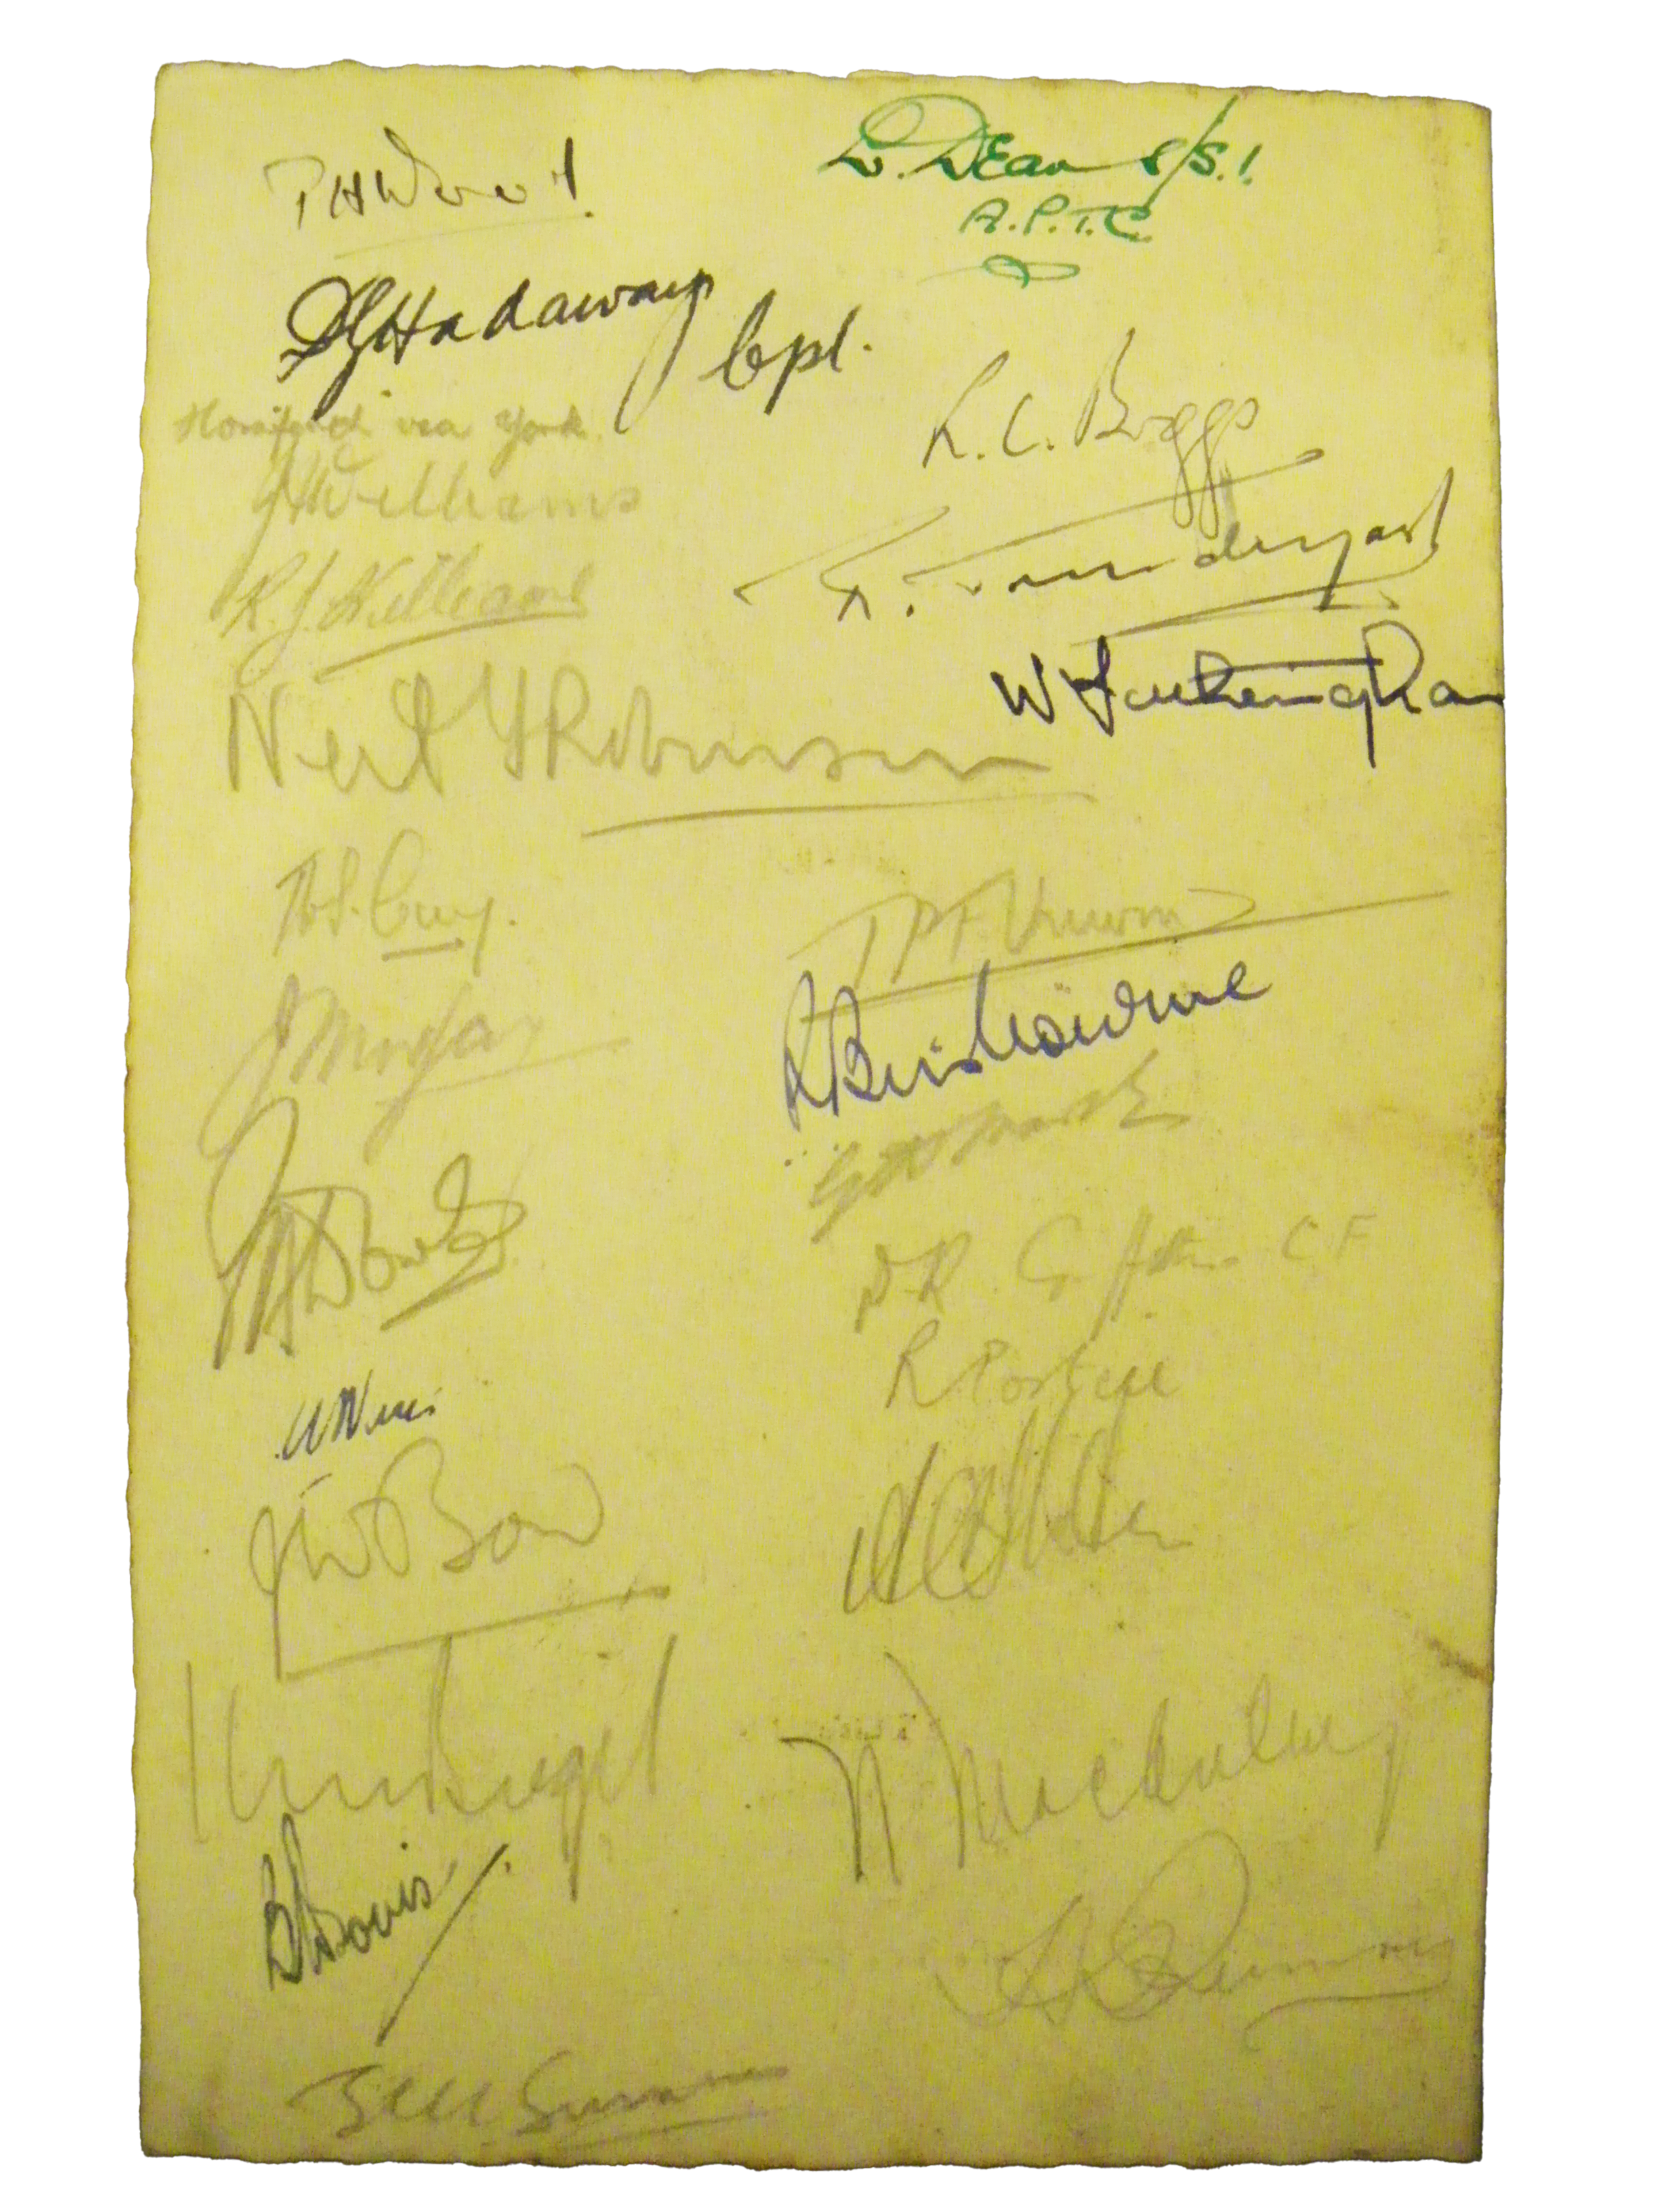 The back of a dinner menu with autographs on it.